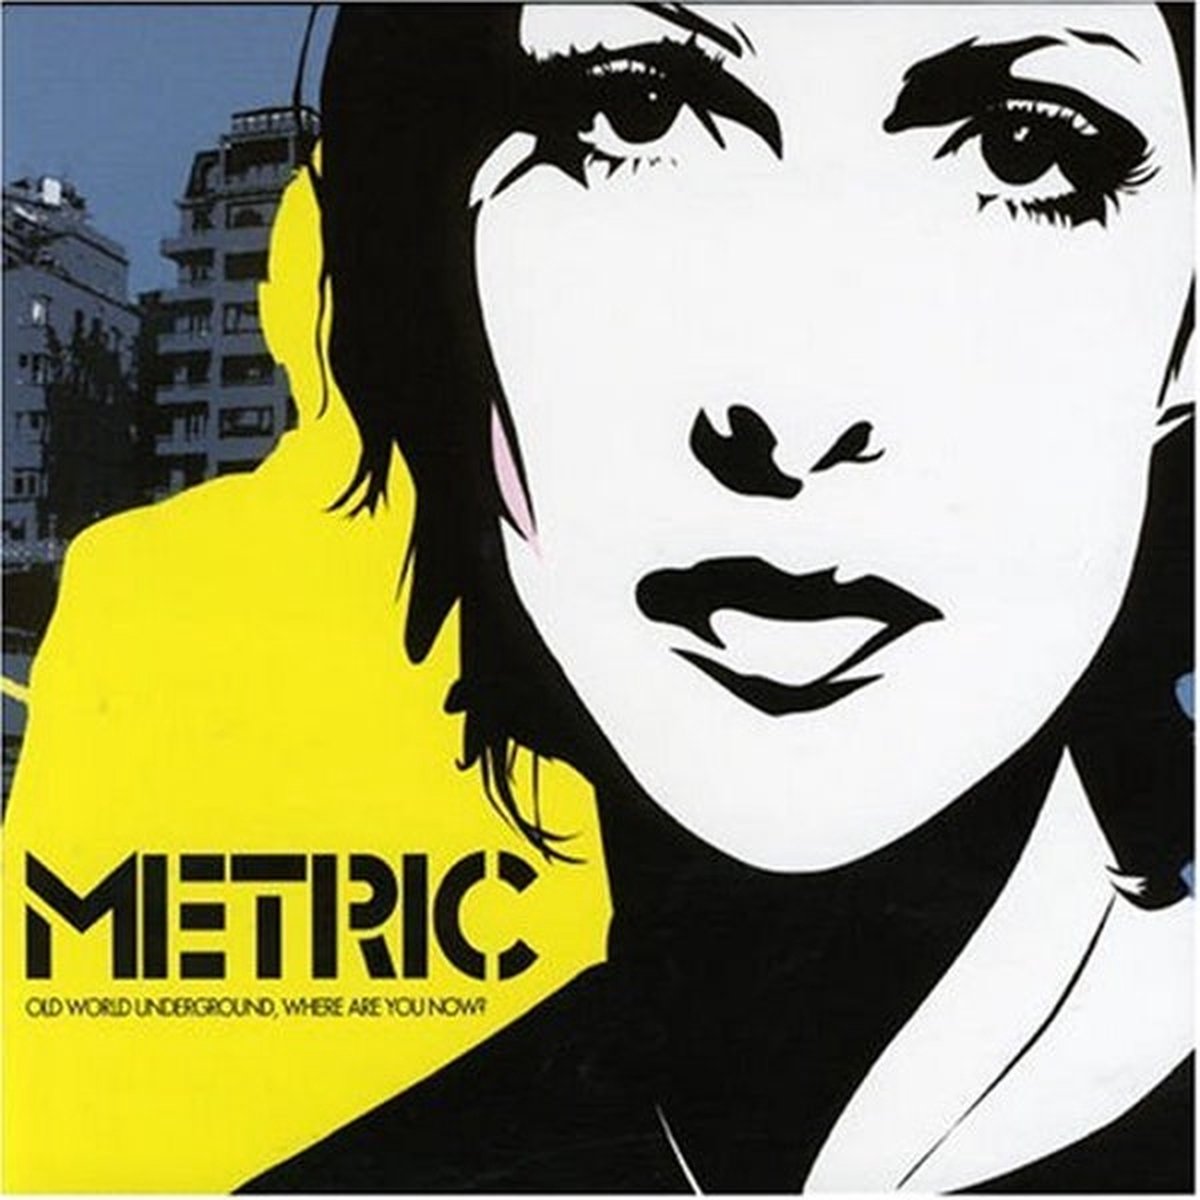 Metric - Old World Underground, Where Are You Now? (Coloured Vinyl)